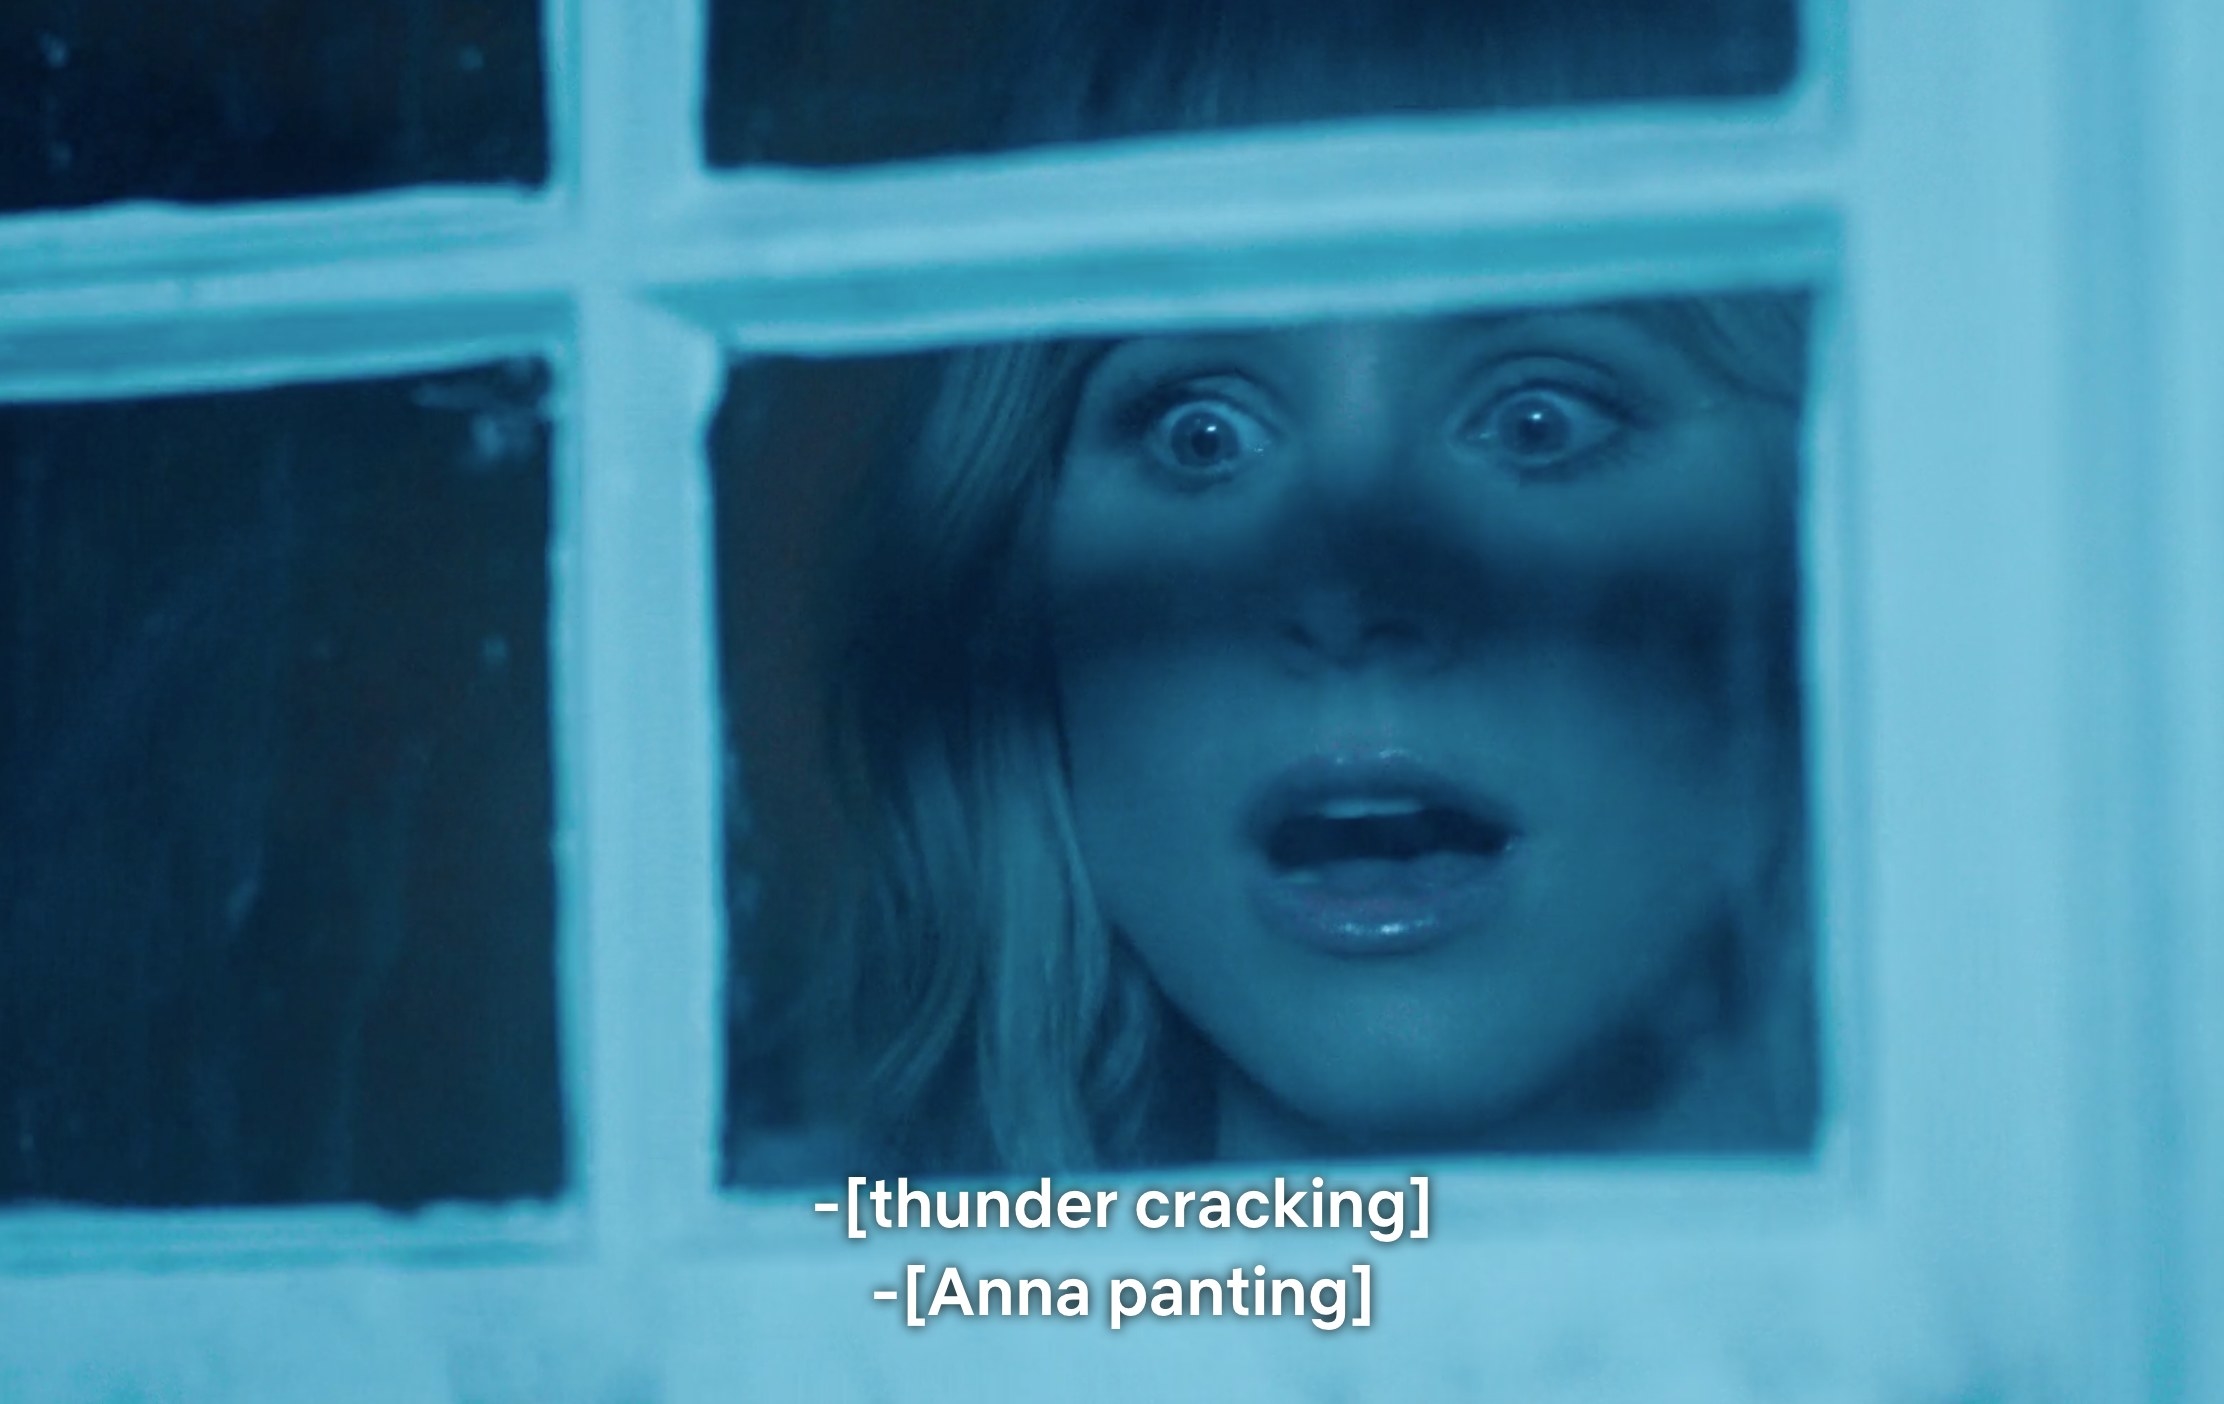 Bell as Anna looking through her window with a terrified expression on her face as thunder cracks and she pants